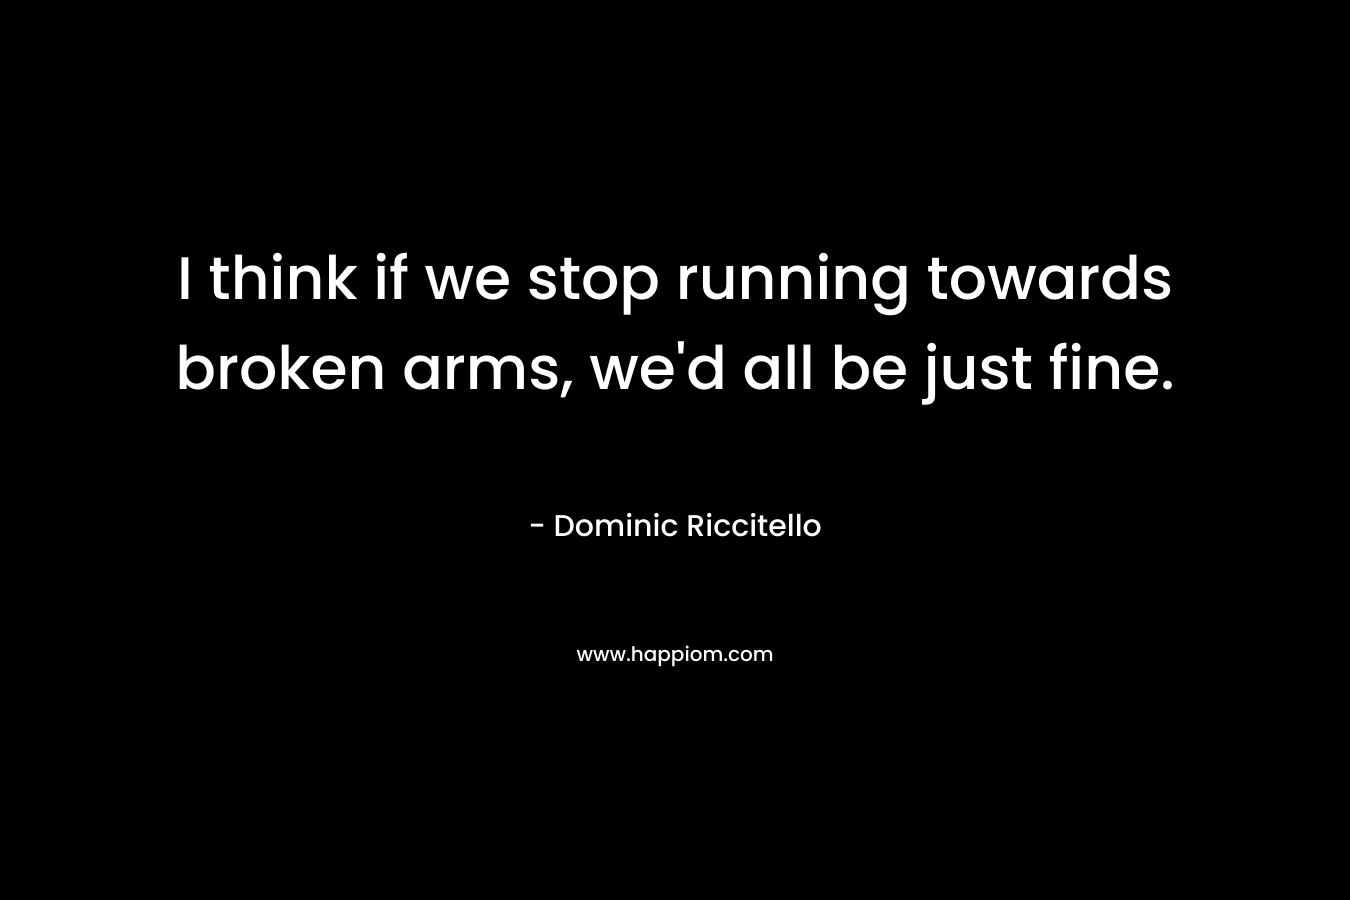 I think if we stop running towards broken arms, we'd all be just fine.